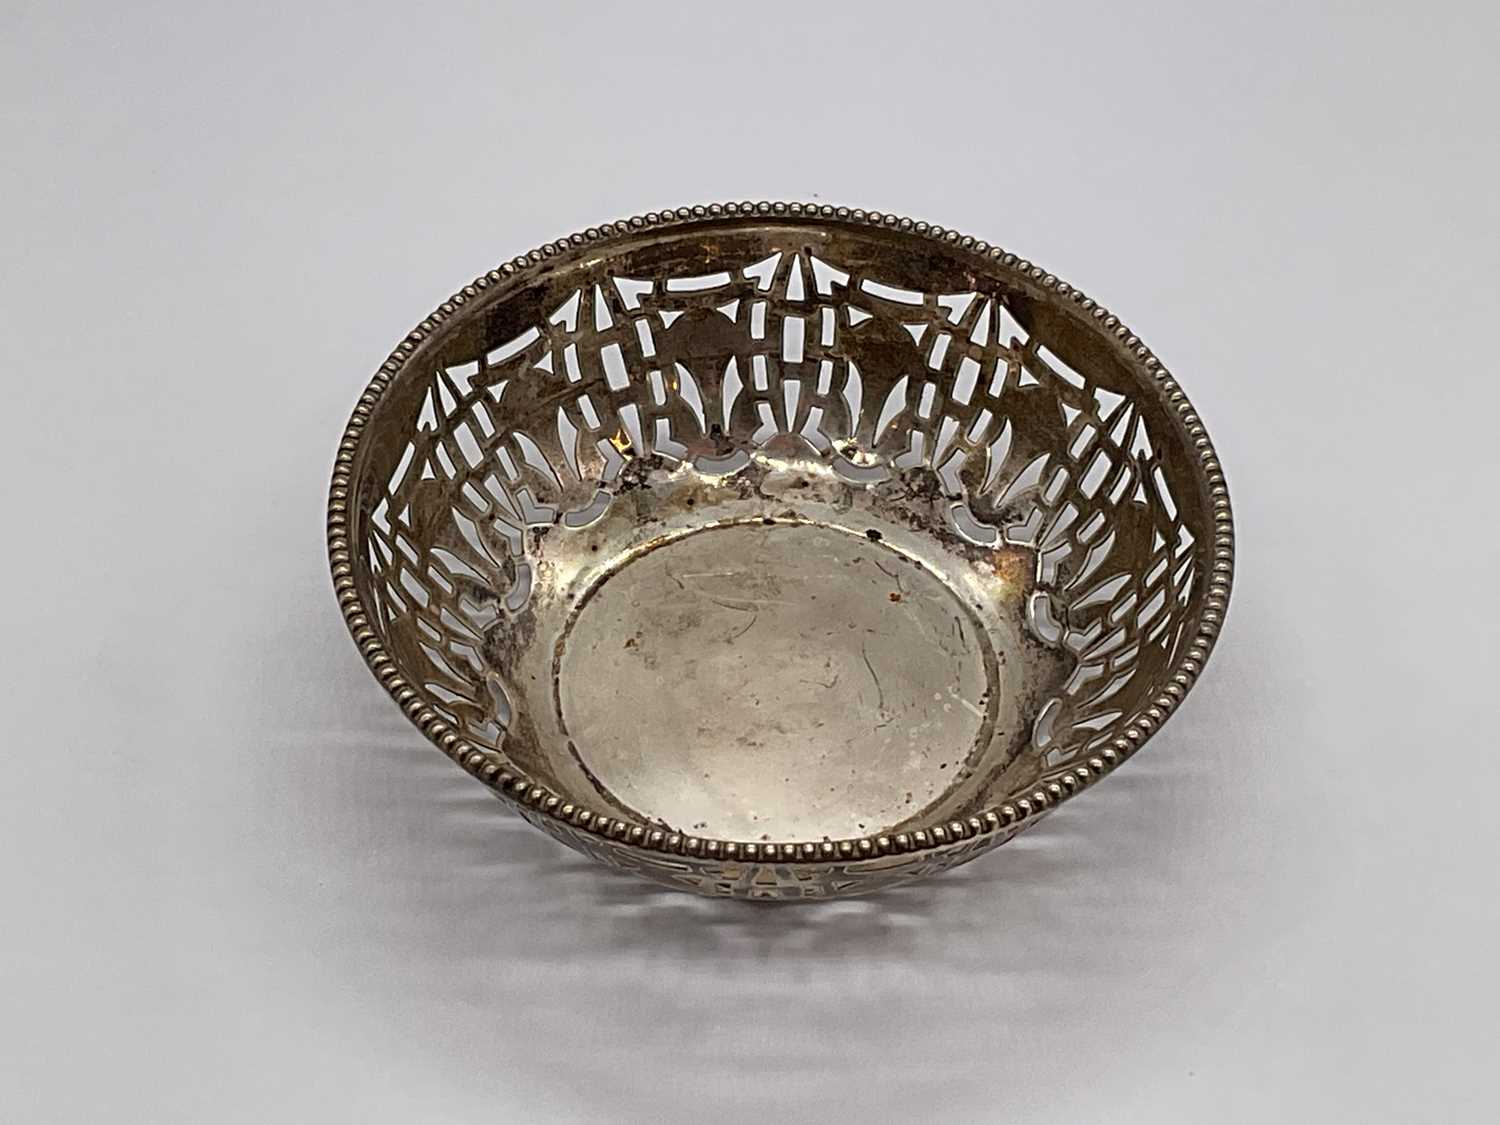 GEORGE HOWSON; an Edward VII hallmarked silver dish with pierced decoration, London 1902, approx